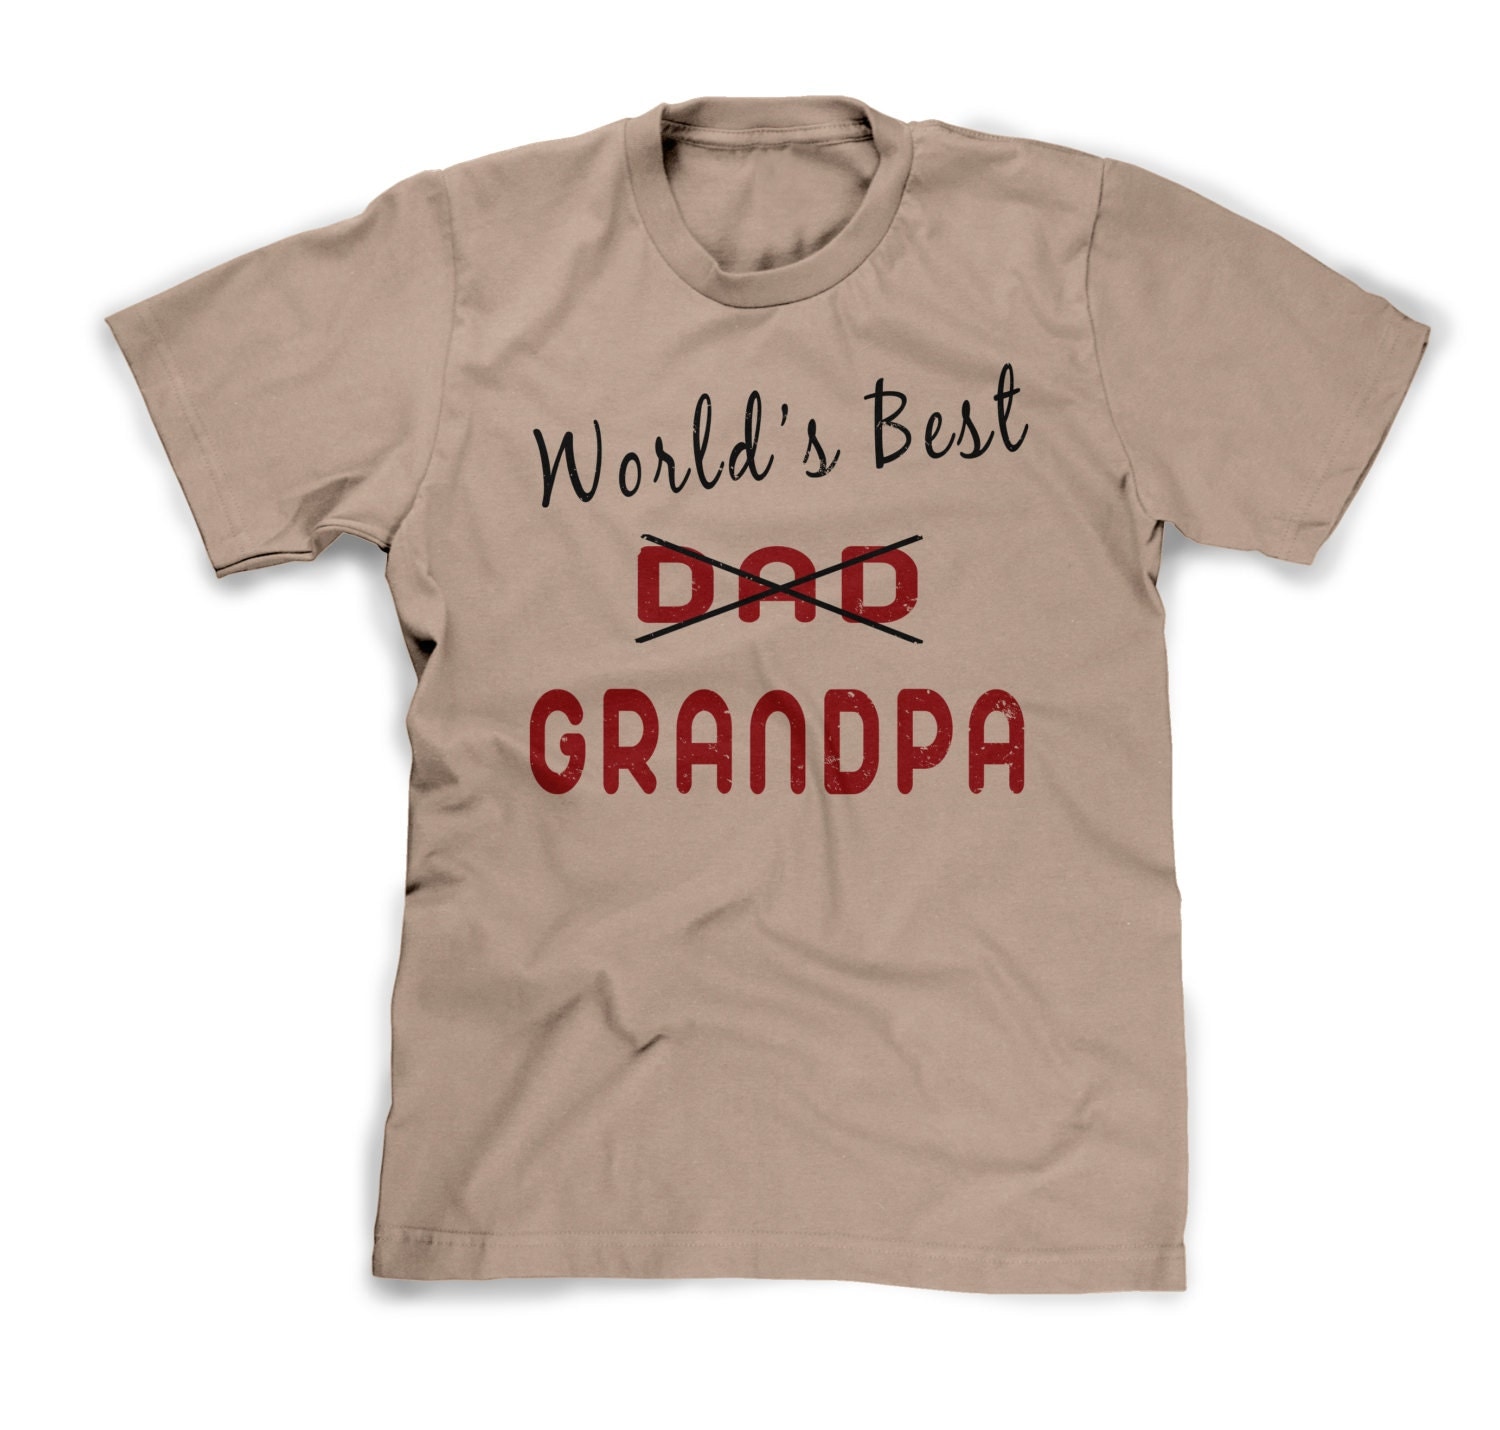 Worlds Best Grandpa Shirt Promoted To Grandpa By Funhousetshirts